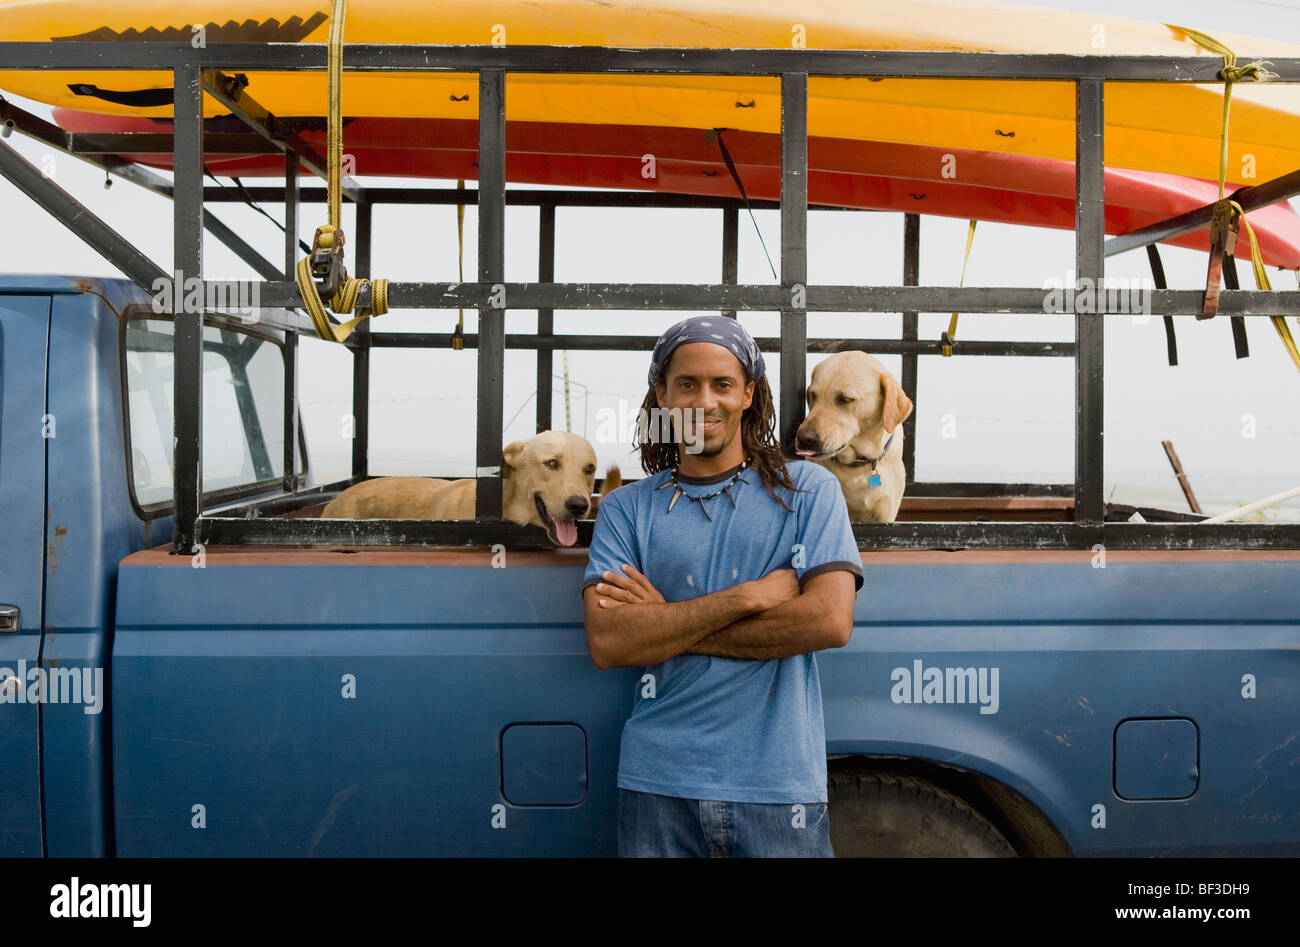 Hispanic man with dogs leaning against truck Stock Photo